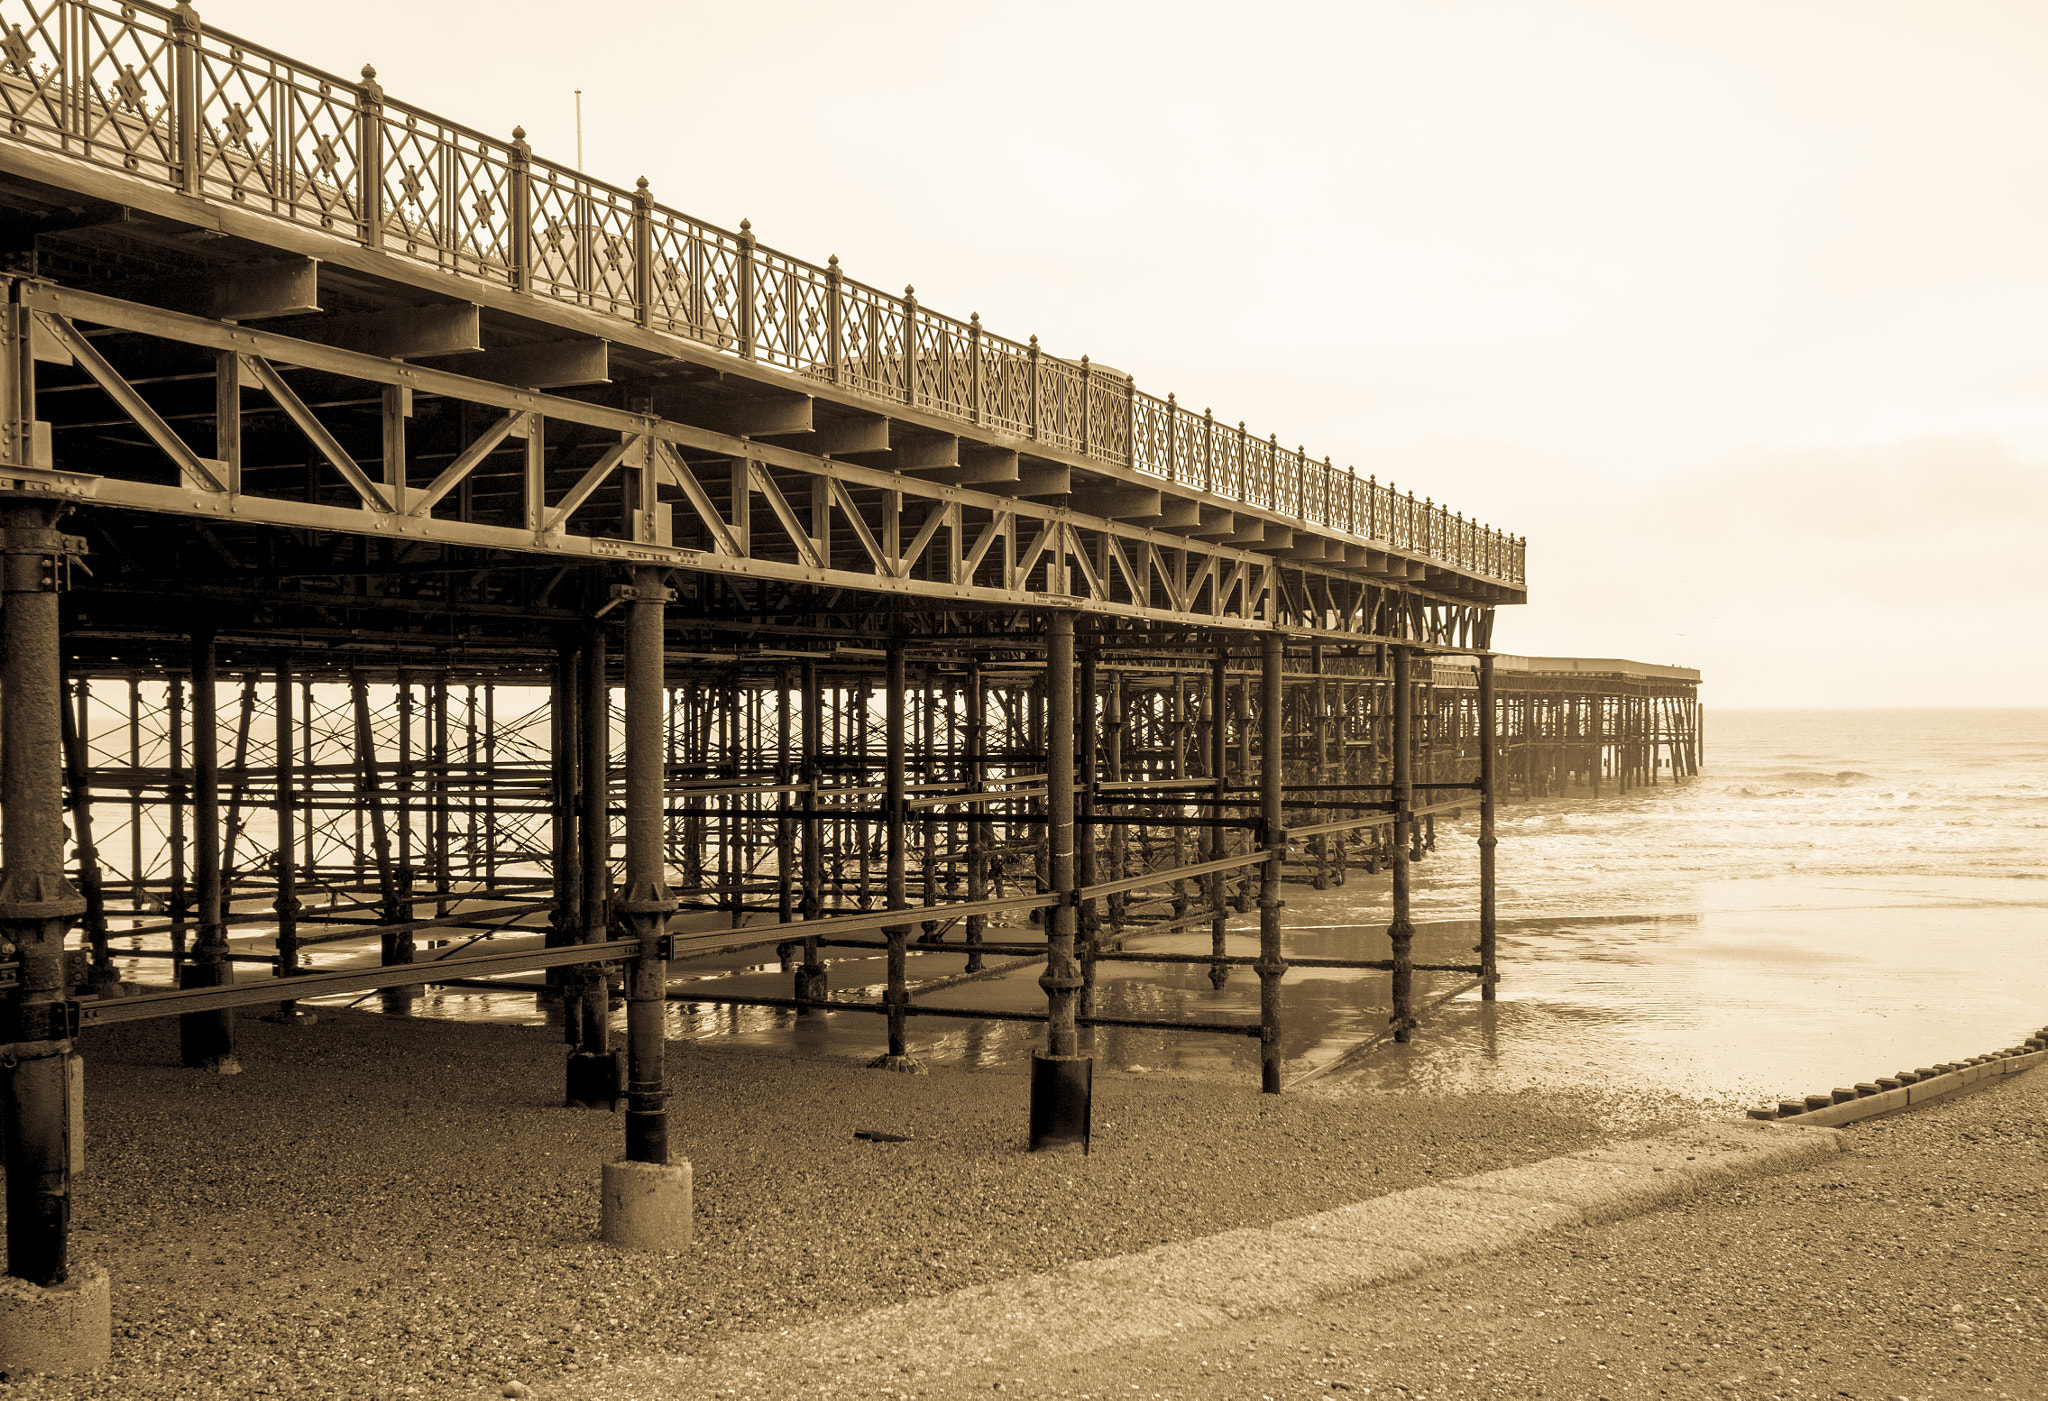 Olympus OM-D E-M5 II sample photo. Hastings pier photography